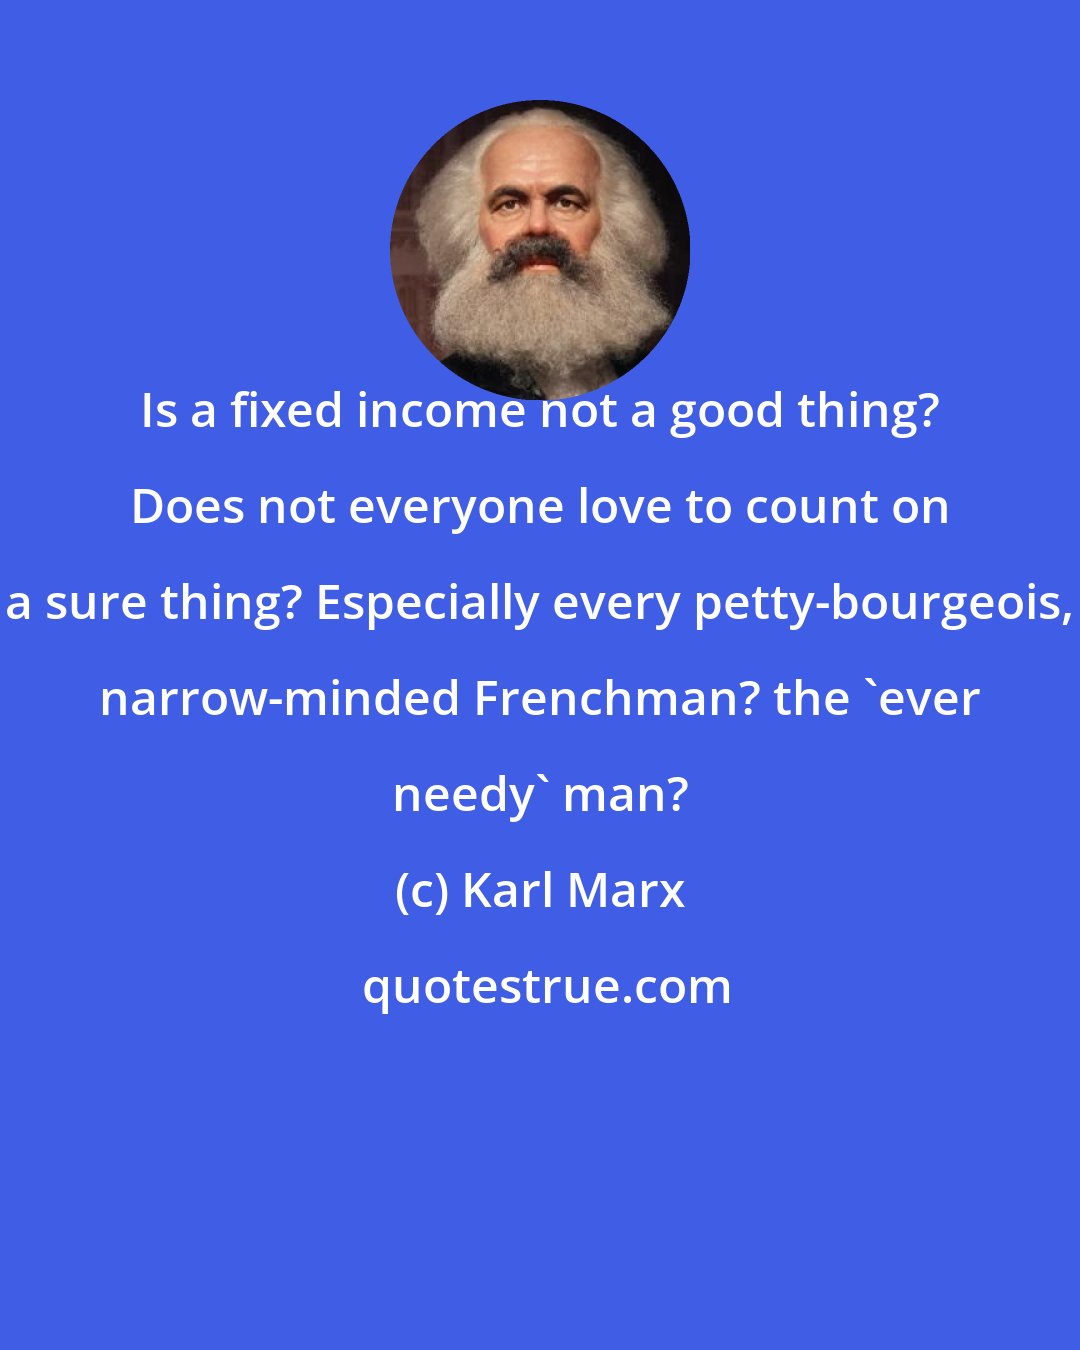 Karl Marx: Is a fixed income not a good thing? Does not everyone love to count on a sure thing? Especially every petty-bourgeois, narrow-minded Frenchman? the 'ever needy' man?